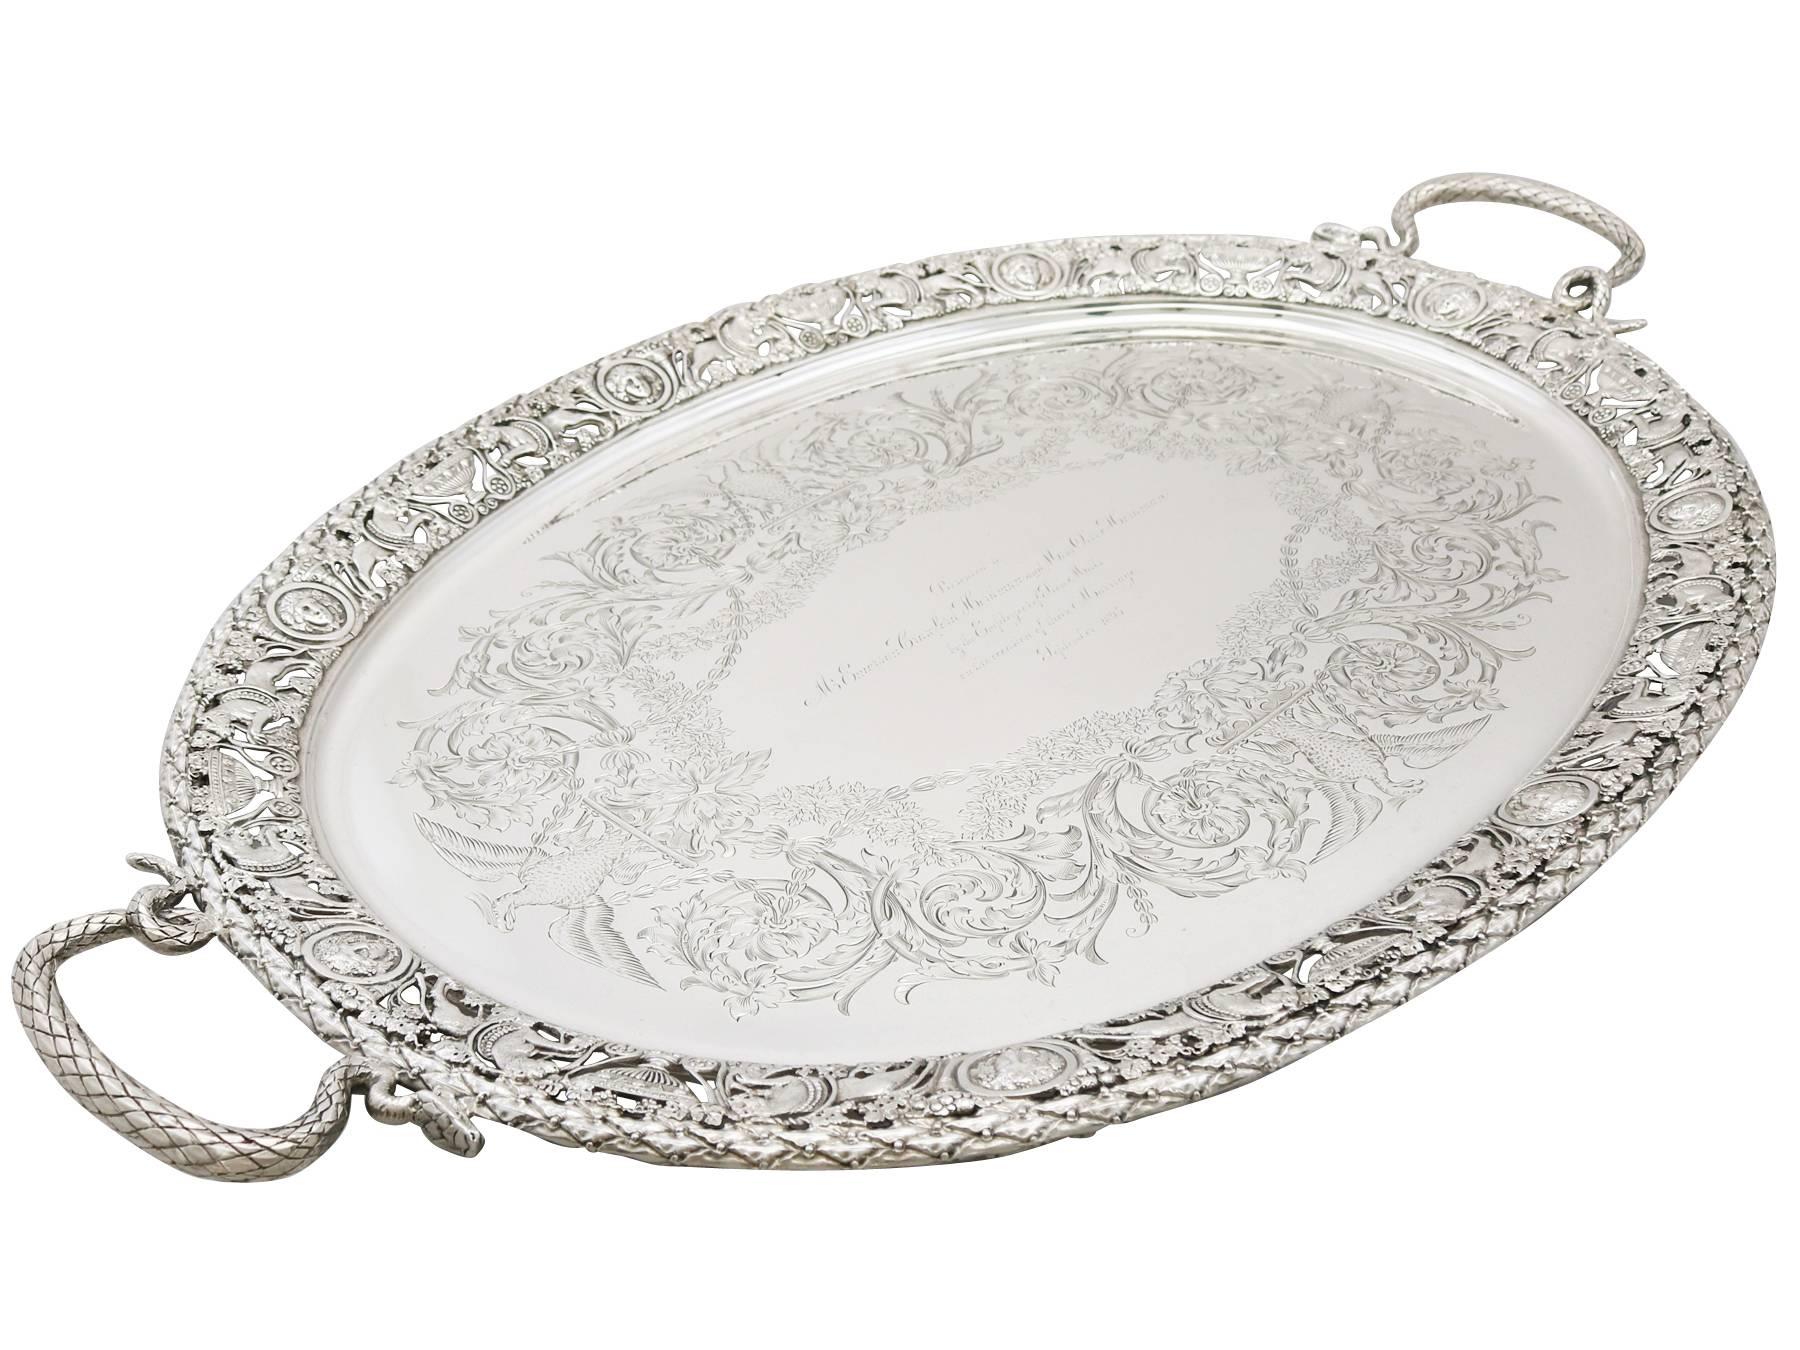 A magnificent, fine and impressive antique Victorian English sterling silver two handled tea tray; an addition to our silver tray collection.

This magnificent antique Victorian sterling silver tea tray has an oval shaped form.

The surface of